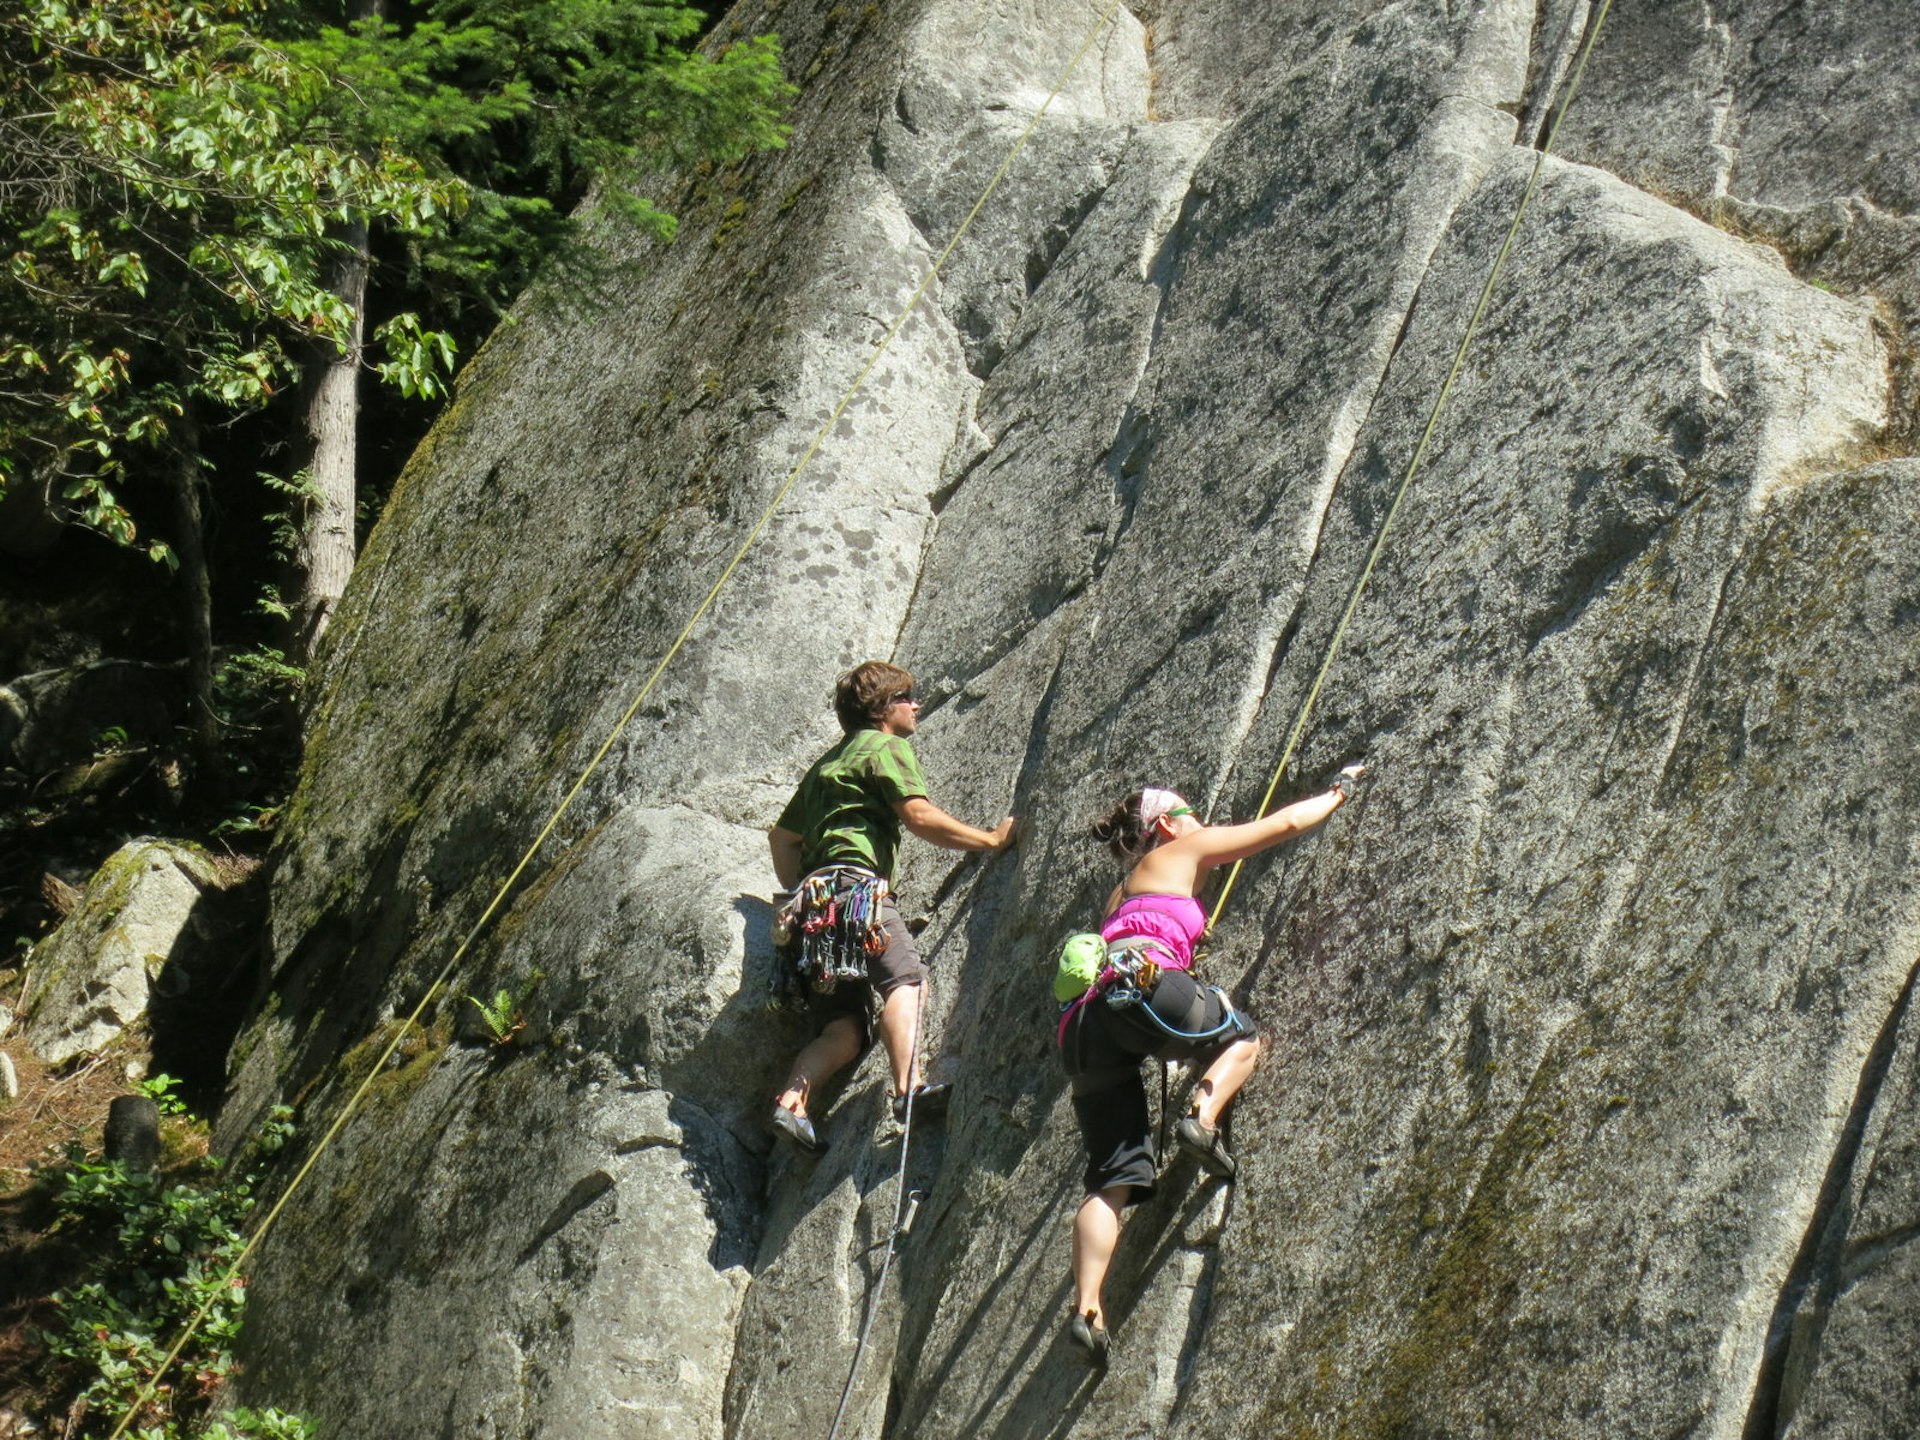 Rock climbers tackling the face of a Squamish cliff © Ruth Hartnup / CC BY 2.0